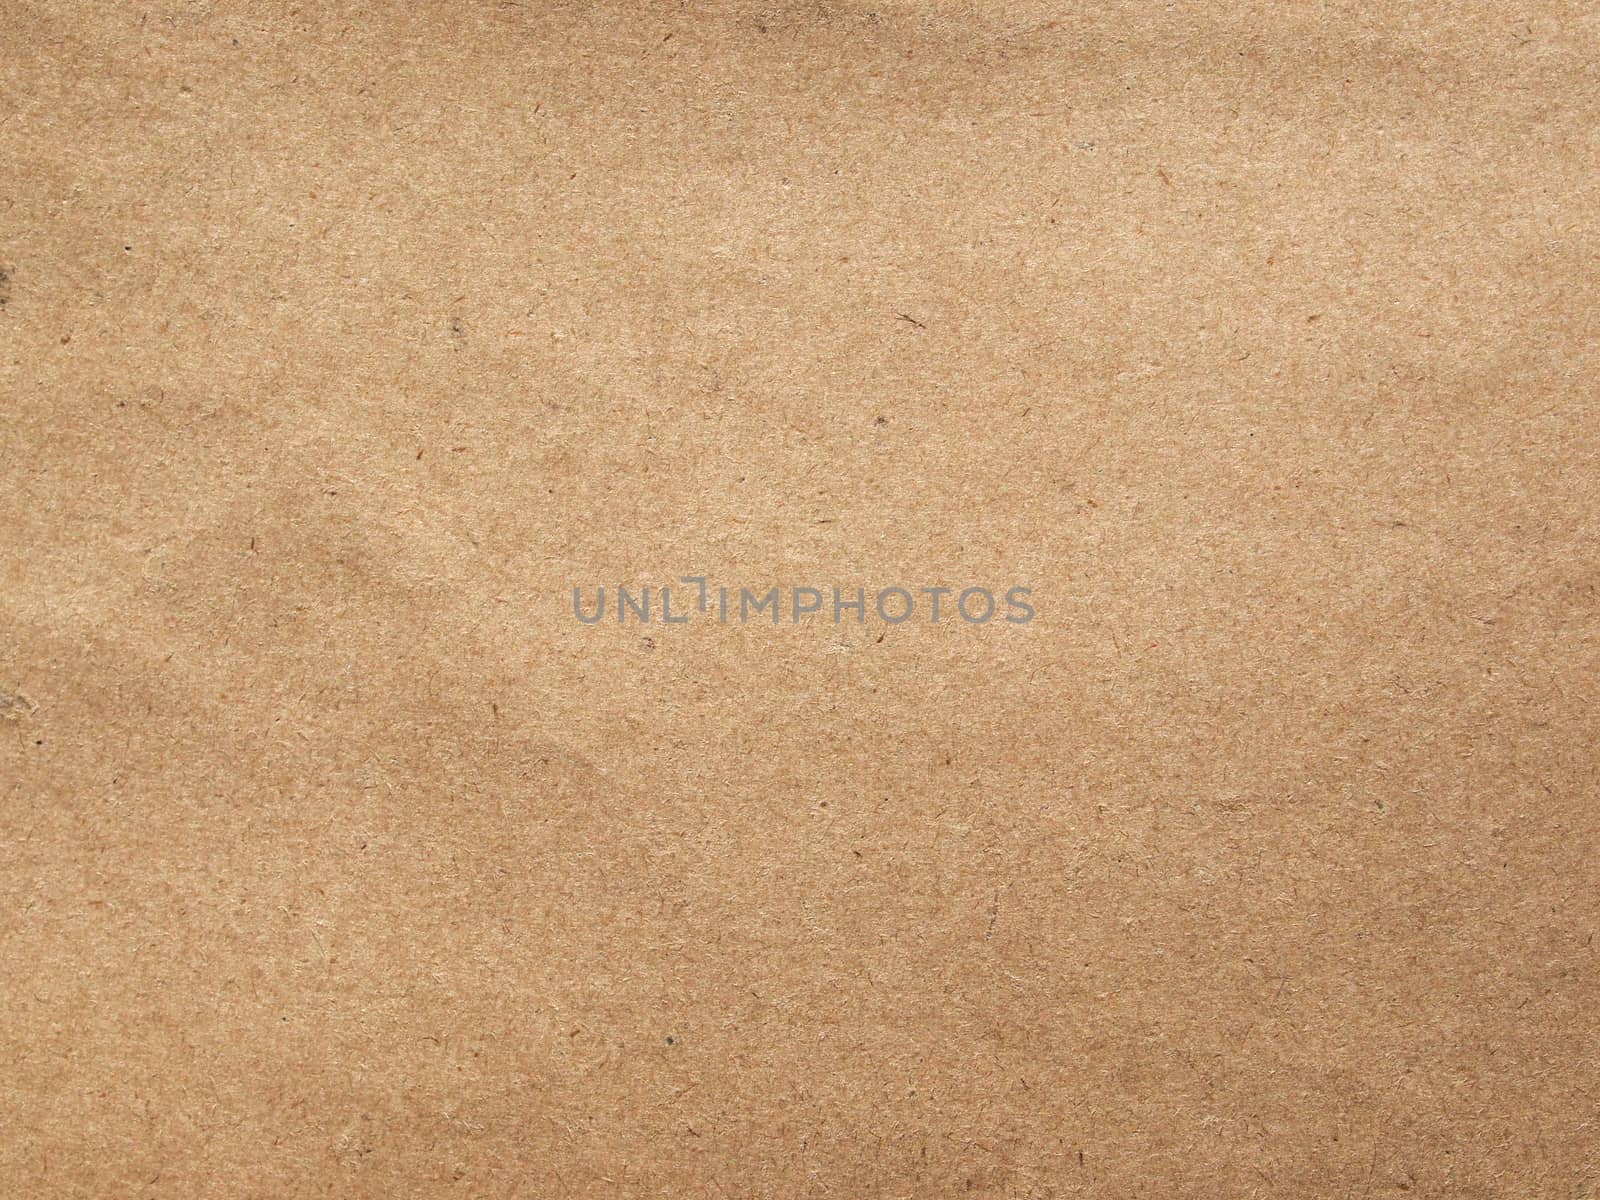 corrugated carboard useful as a background